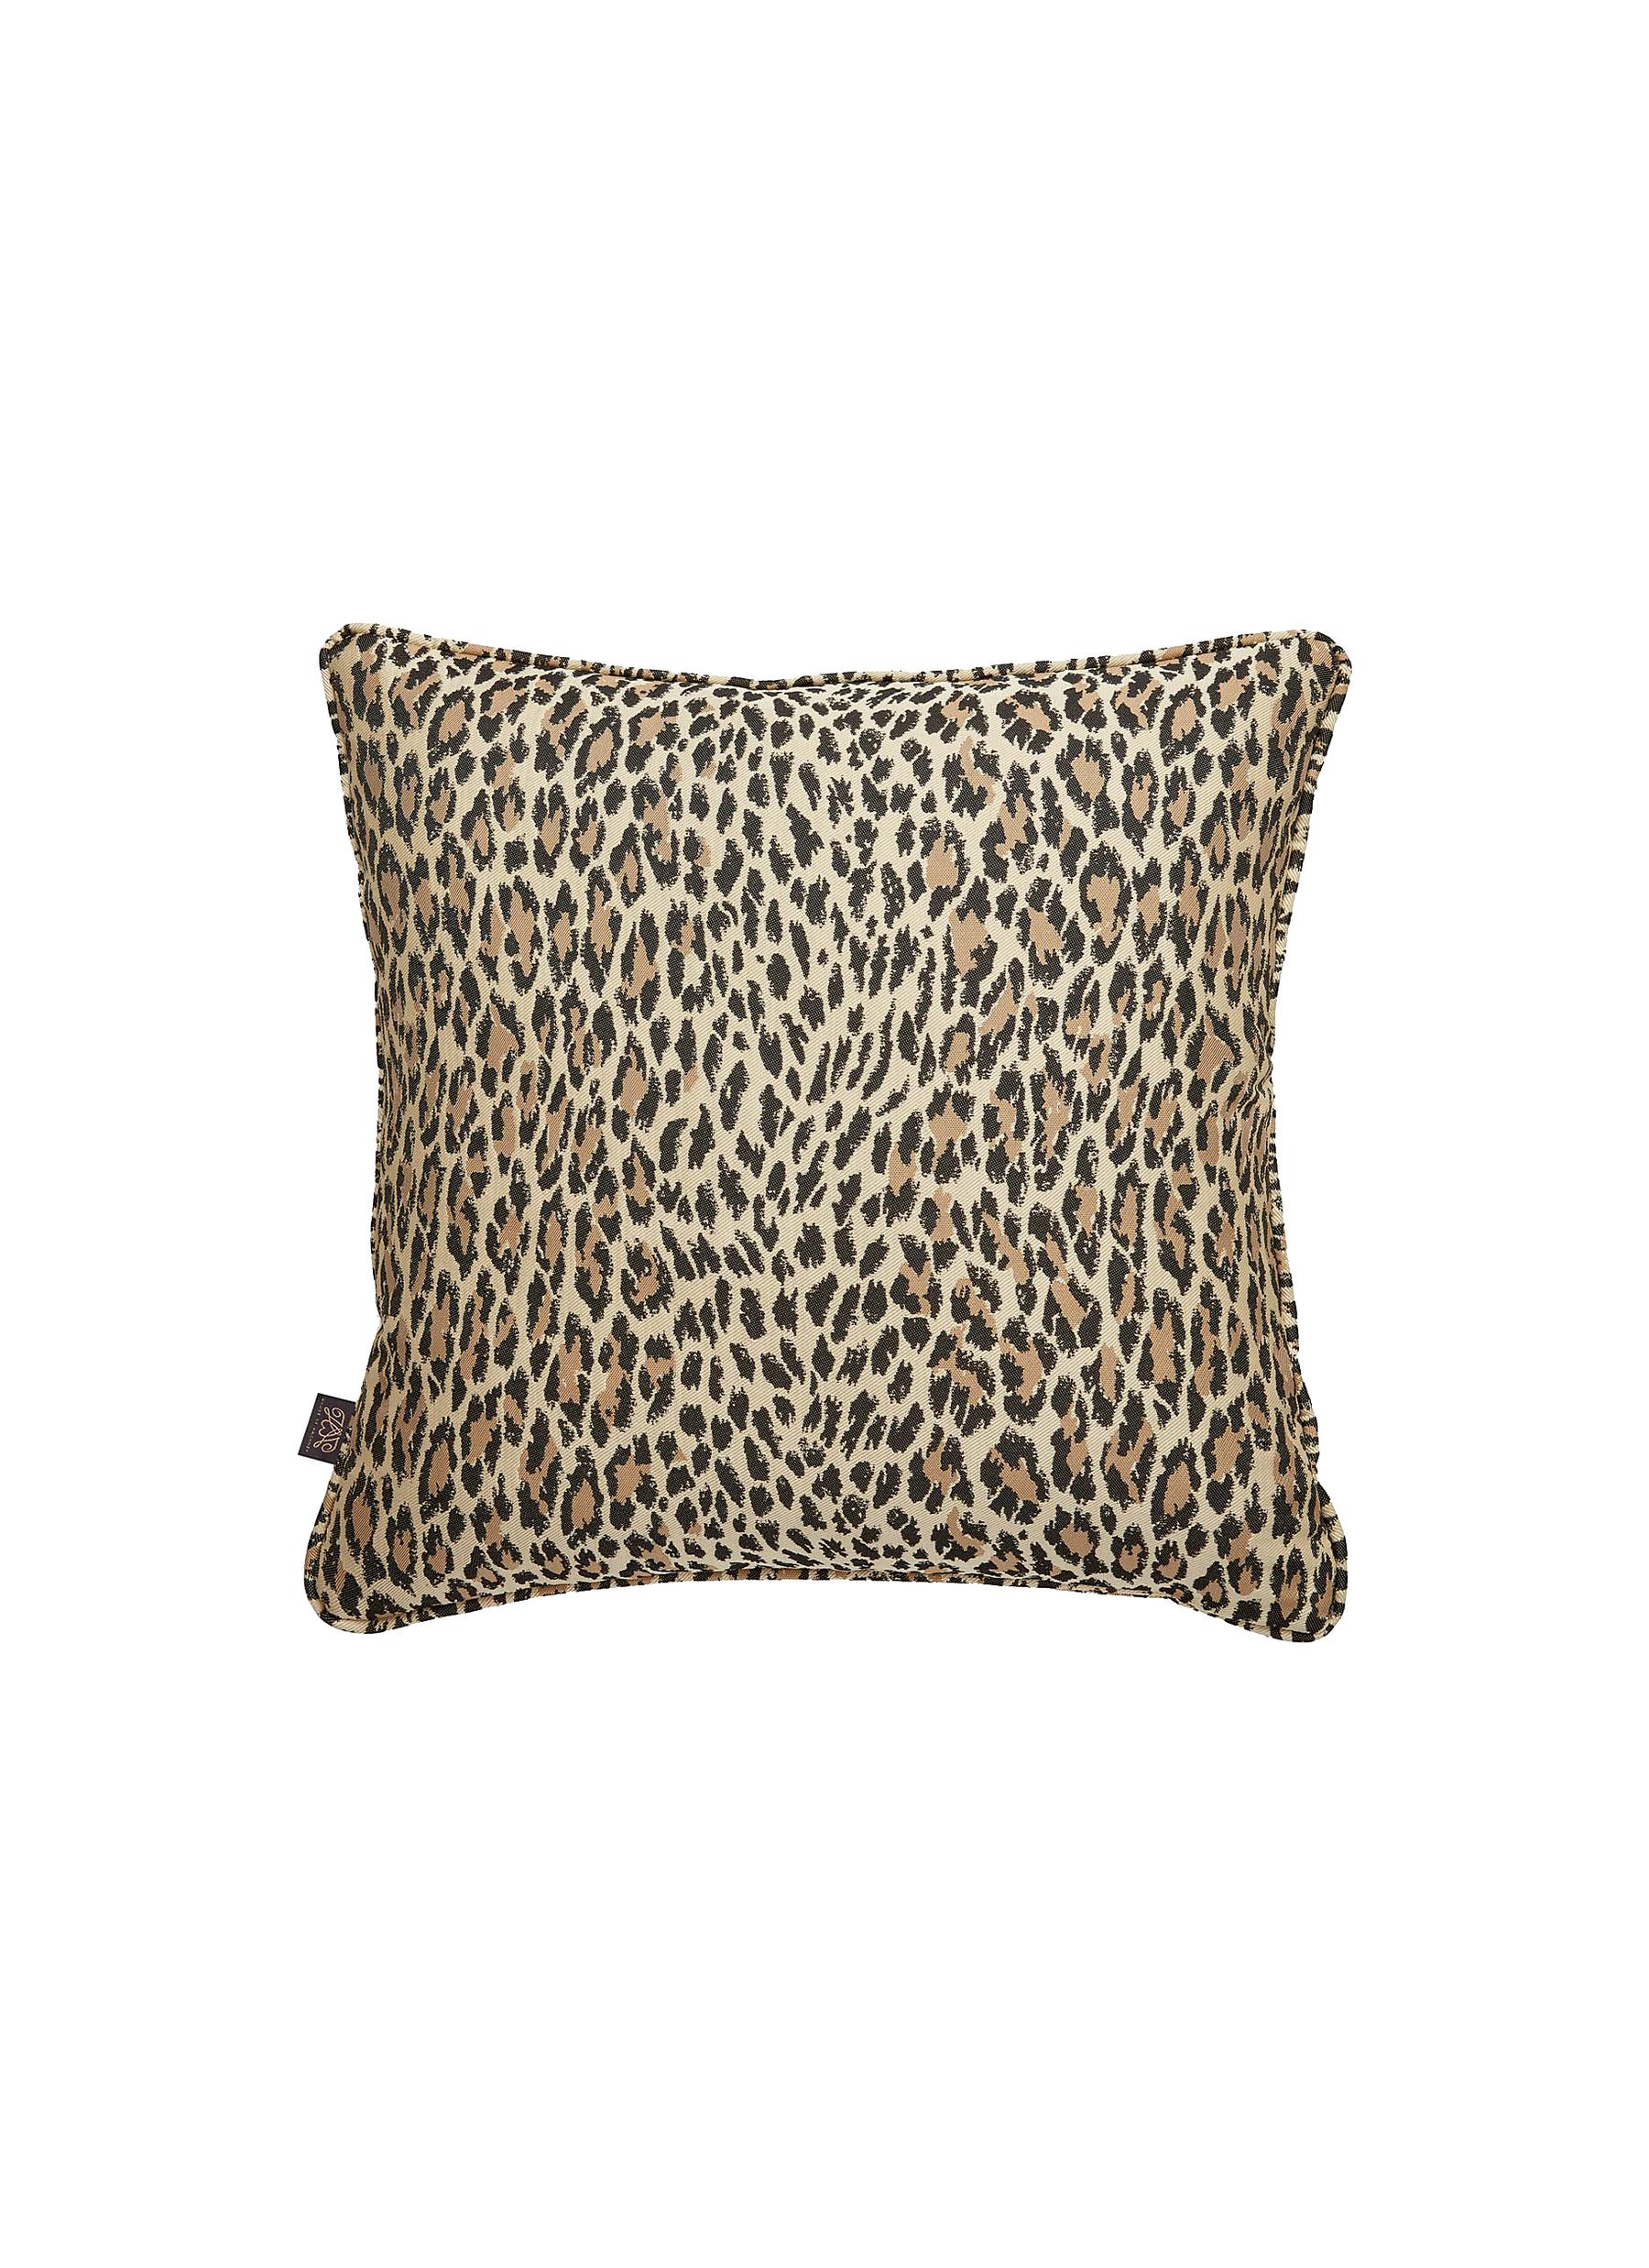 House Of Hackney Wild Card Large Jacquard - Butterscotch